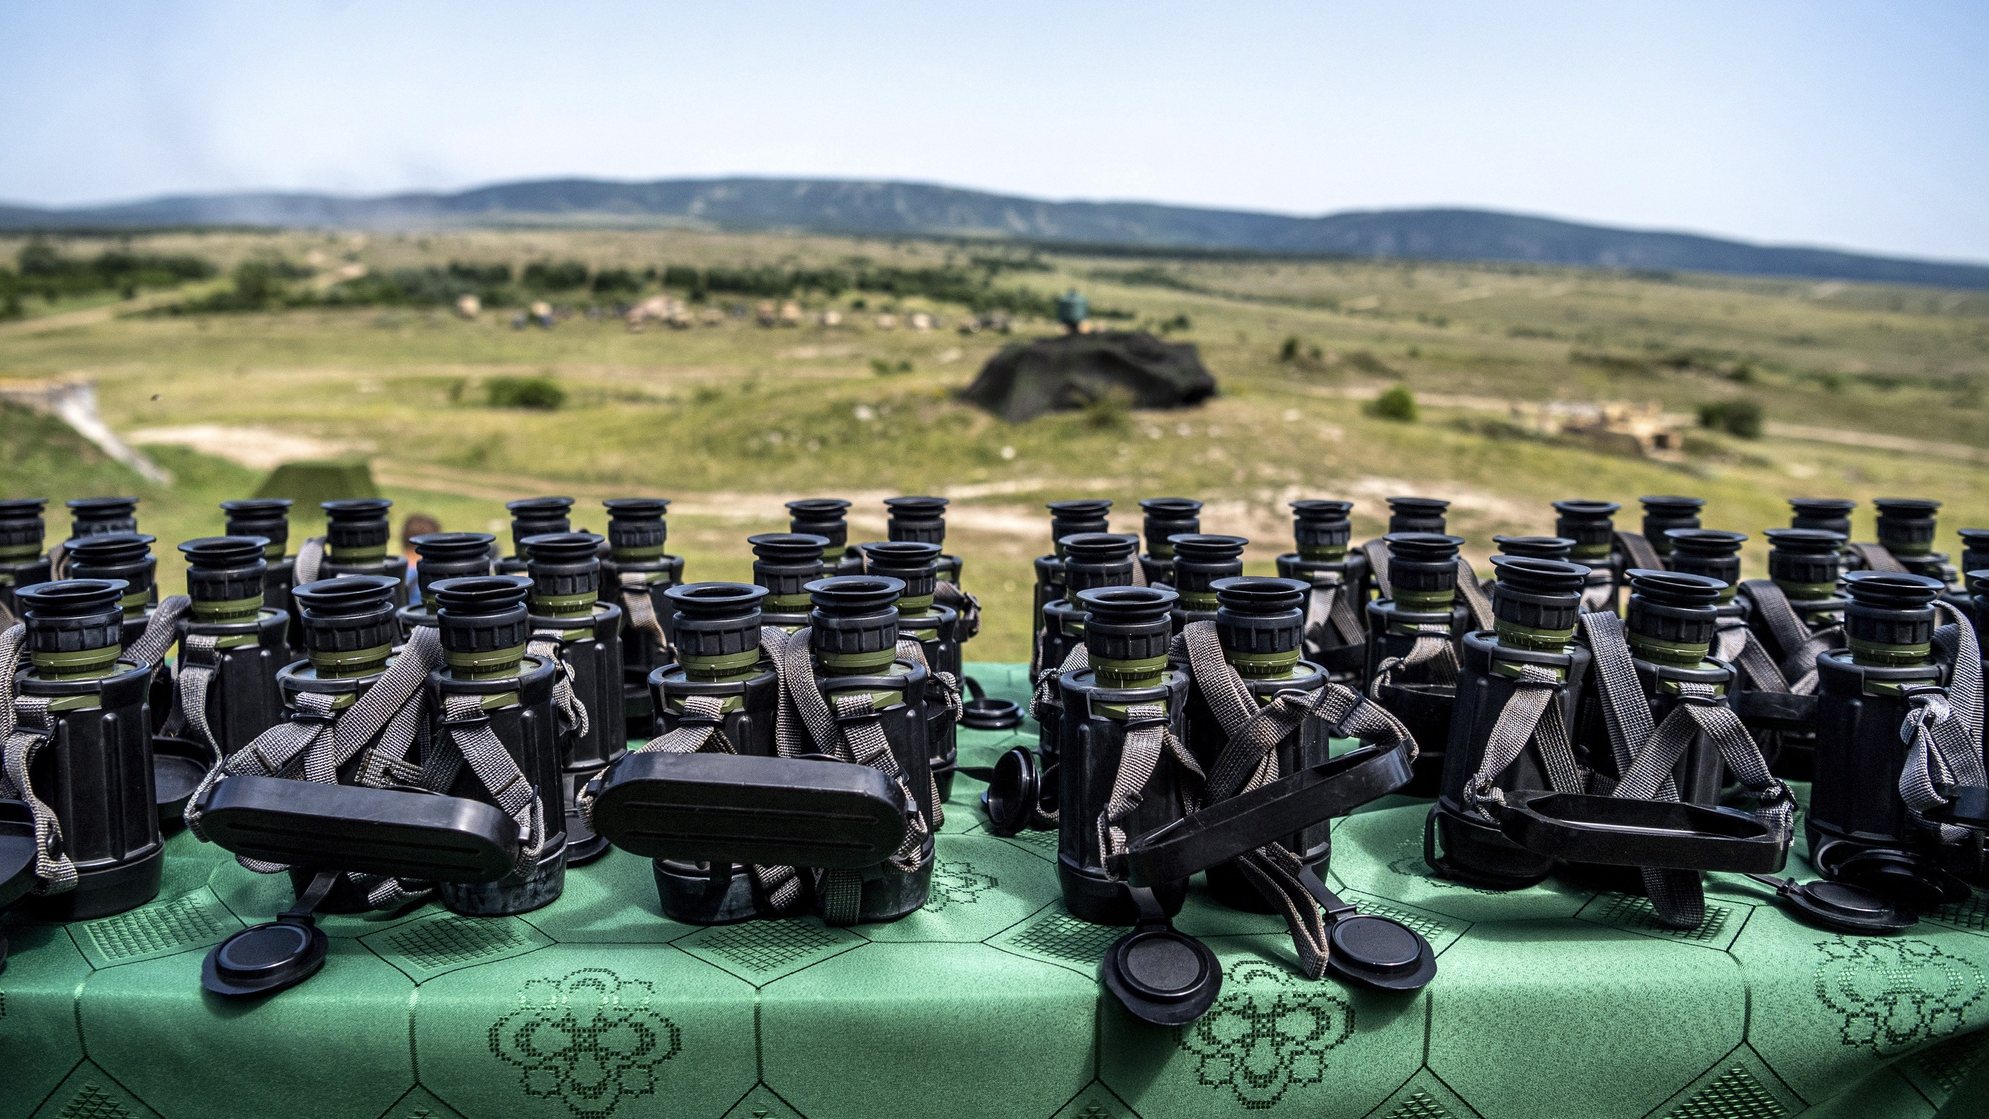 epa07643830 Binoculars are pictured during the Breakthrough 2019 bilateral military summer exercise of the Hungarian Defence Forces and USAREUR, the US Army units serving in Europe, near Osku, western Hungary, 12 June 2019. Taking place from June 04 to 15, the participants of the exercice test fires systems and execute multi-echelon fires to increase interoperability and readiness between the two armies.  EPA/ZSOLT SZIGETVARY HUNGARY OUT